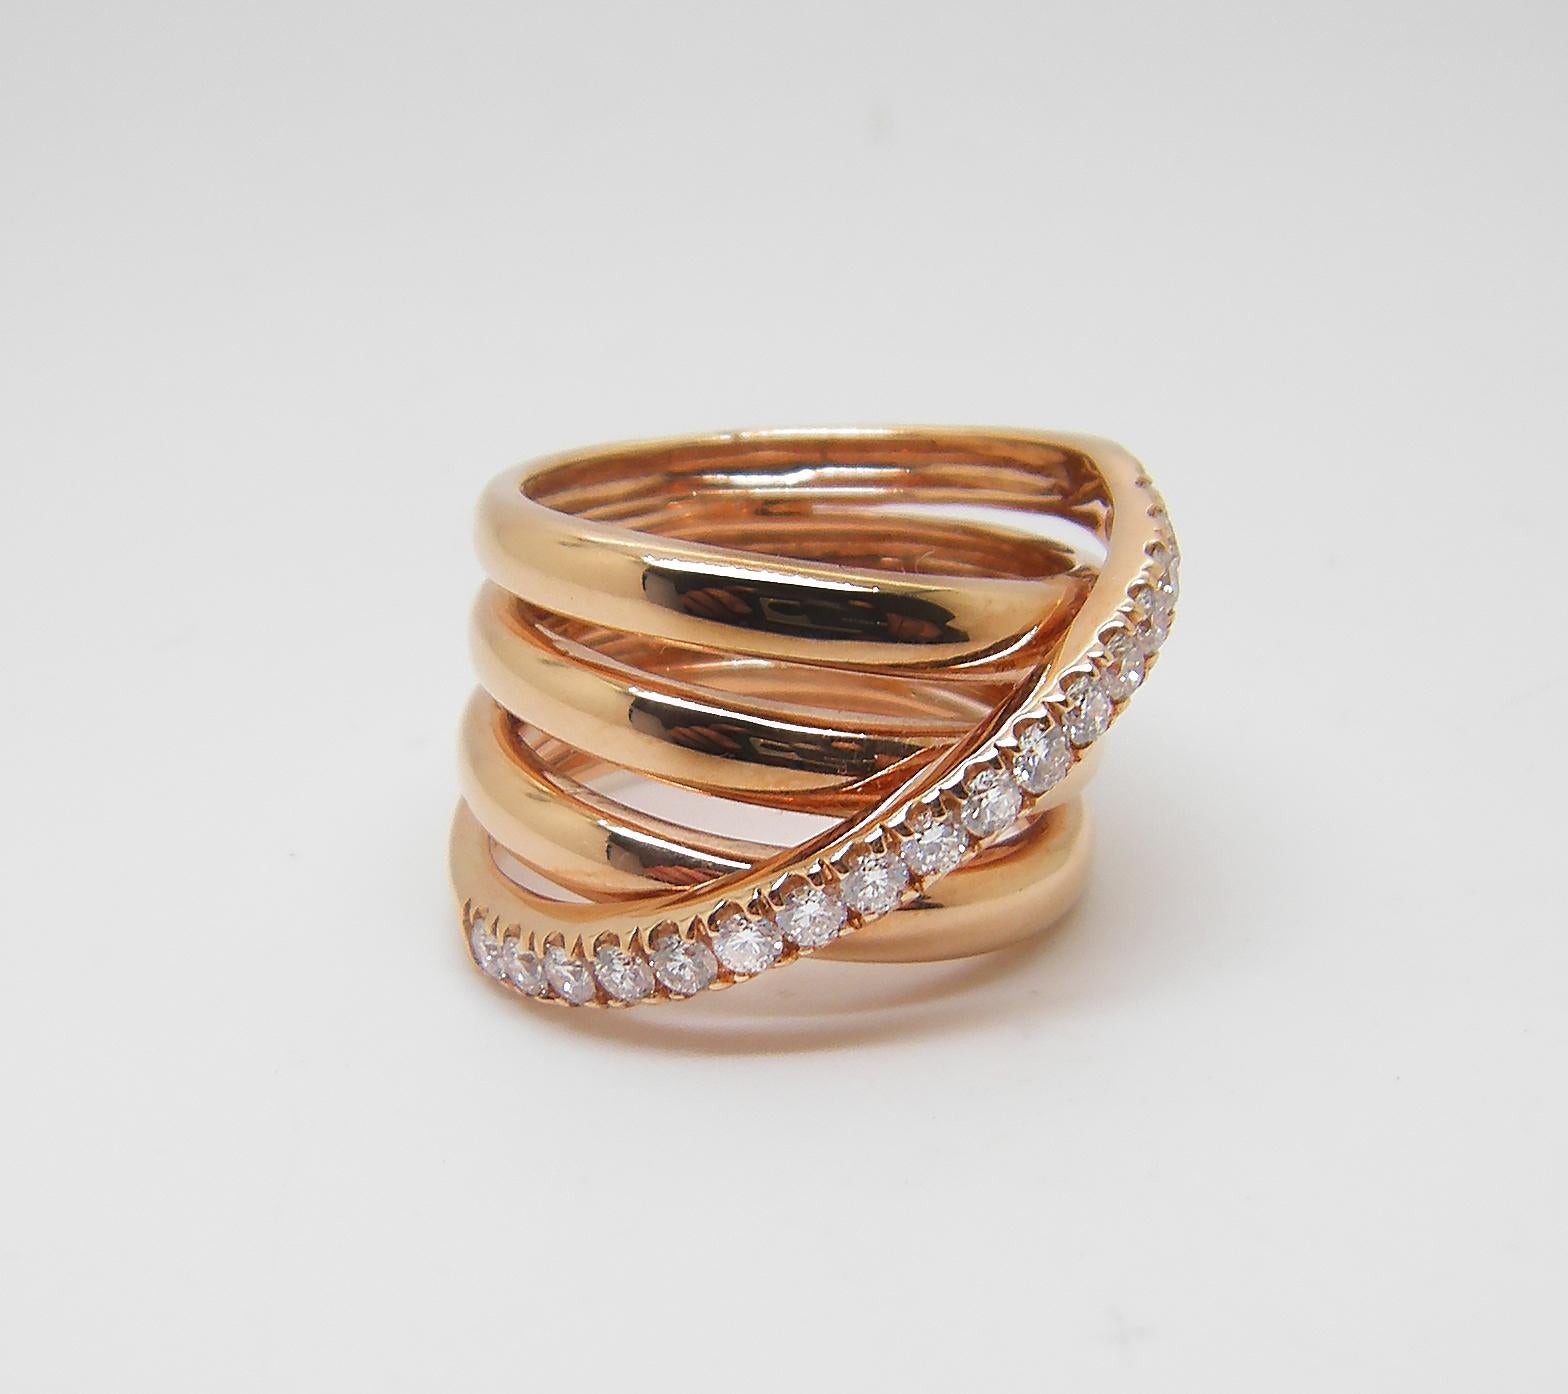 S.Georgios designer 18 Karat Rose Gold Diamond Wide Band Ring is all handmade in a unique design. The gorgeous ring features brilliant cut white diamonds total weight of 0.55 Carat and is made of a wide spiral design. 
We also make this beautiful